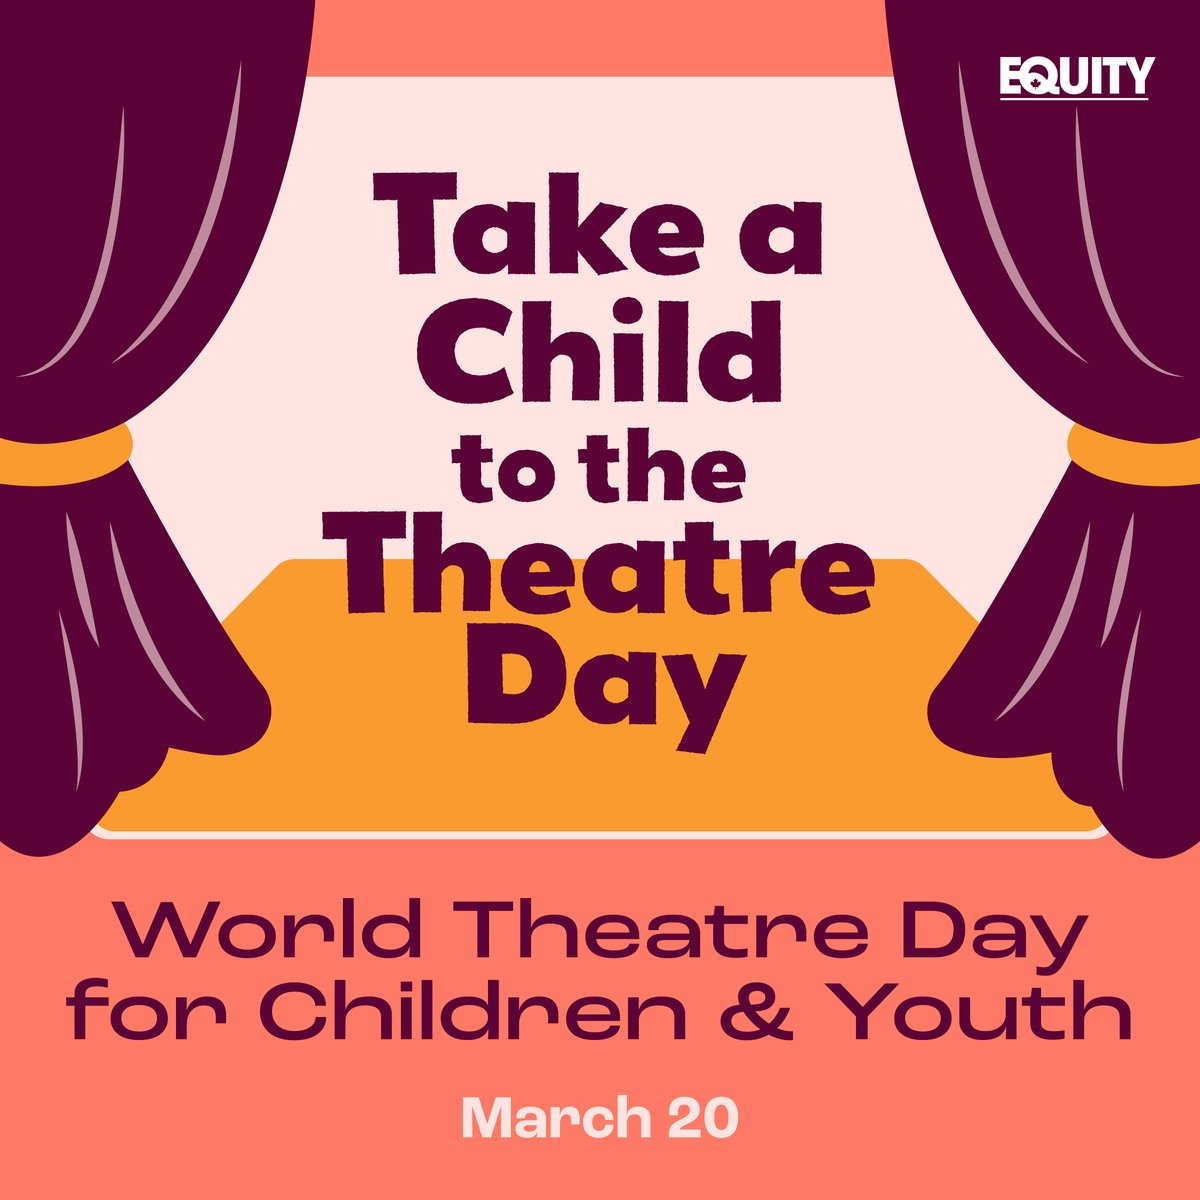 Happy World Theatre Day for Children & Youth! Today is dedicated to introducing young audiences to the world of live performance, advocating for children's right to theatre and art, and celebrating the young artists already making their mark in our industry.